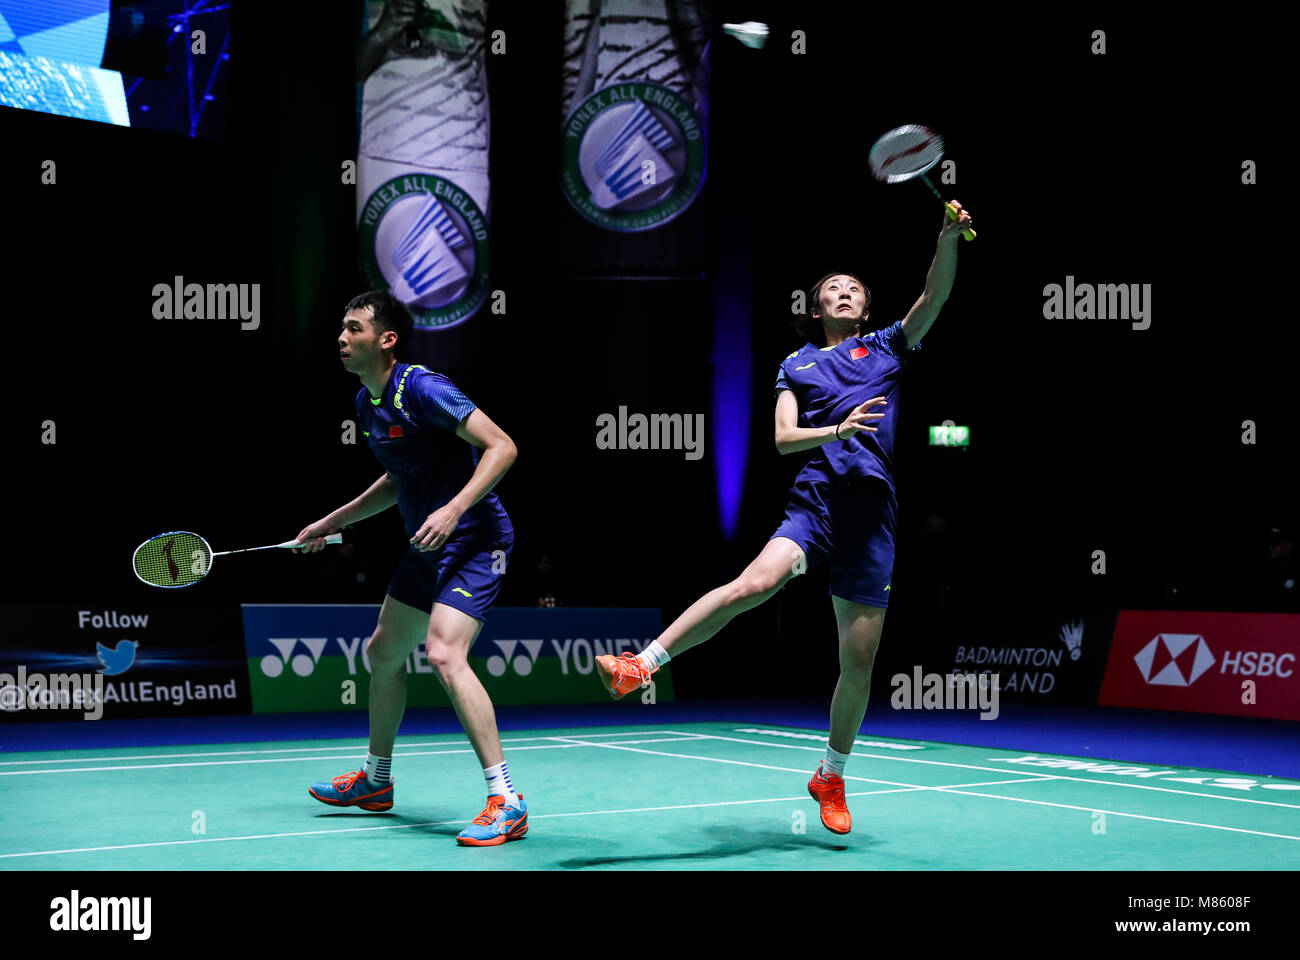 Birmingham, Britain. 14th Mar, 2018. Lu Kai/Cao Tongwei (R) of China compete during the mixed doubles first round match against Lu Ching Yao/Chiang Kai Hsin of Chinese Taipei at All England Open Badminton Championships 2018 in Birmingham, Britain, on March 14, 2018. Lu Kai/Cao Tongwei lost 1-2. Credit: Tang Shi/Xinhua/Alamy Live News Stock Photo